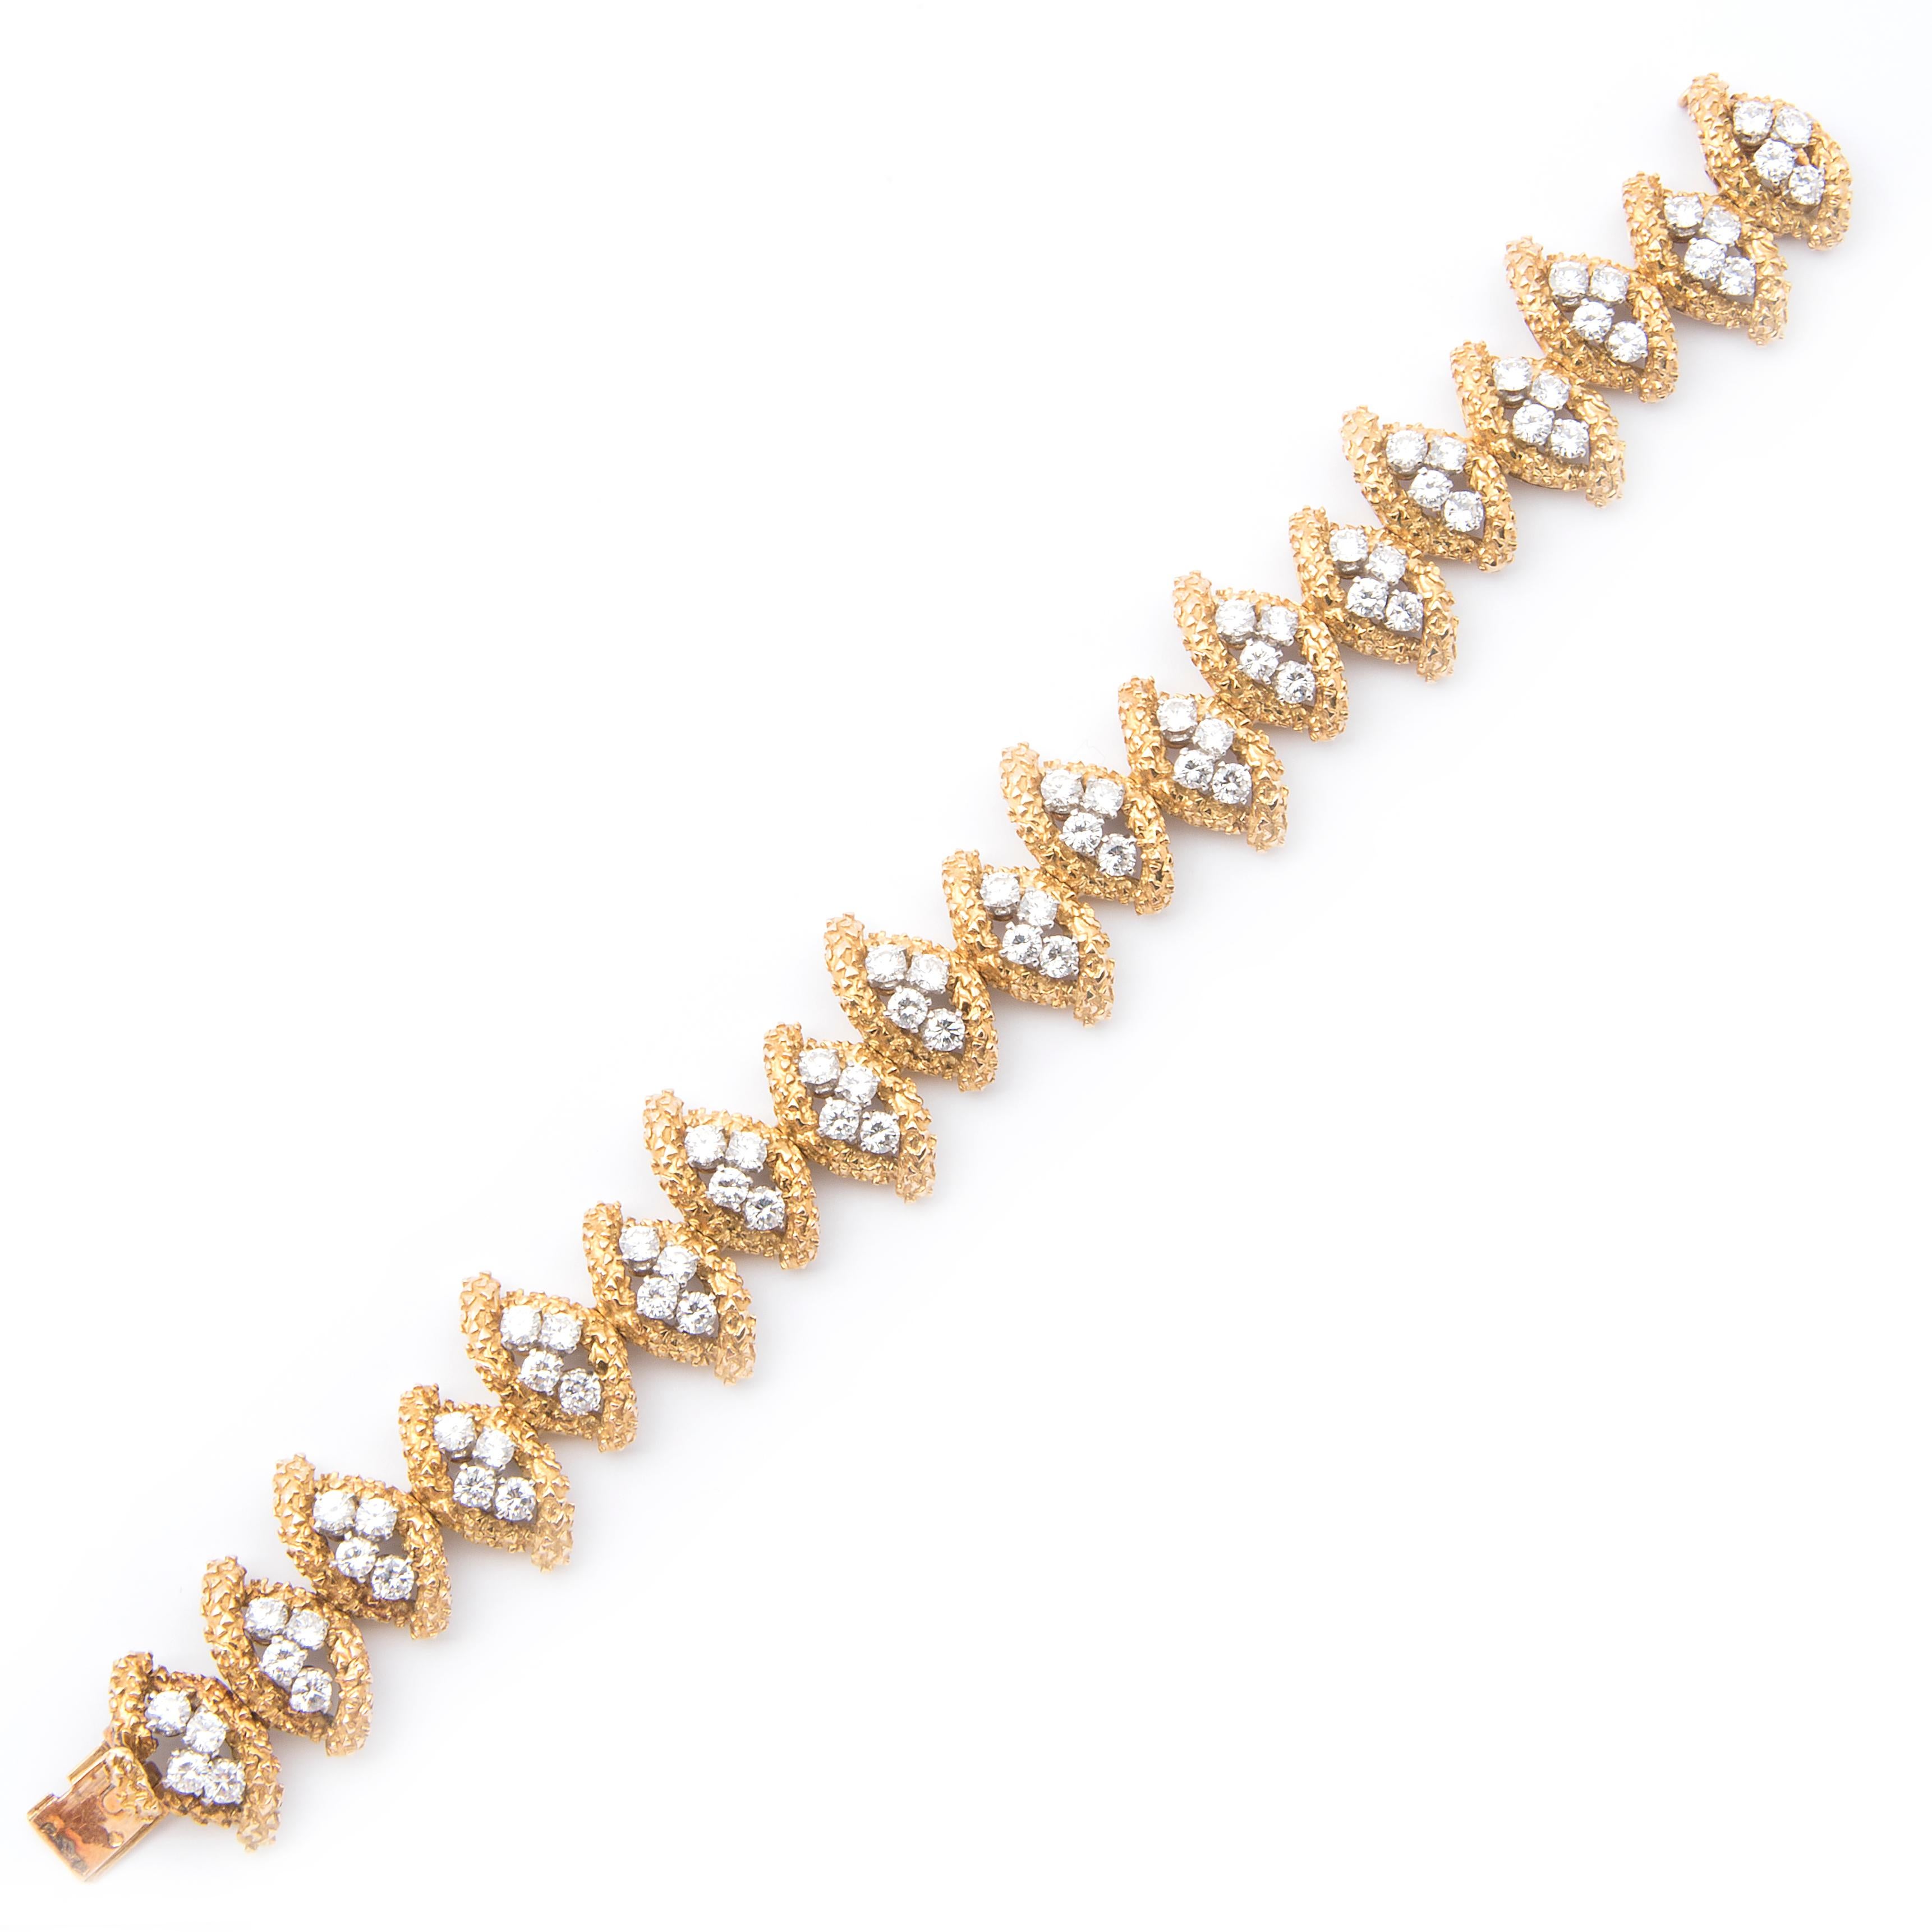 Elegant bracelet by Boucheron, textured 18k yellow gold, each link set with four diamonds, 76 diamonds in total.
Signed Boucheron Paris, maker's mark, French hallmarks and numbered 8650
Circa 1970s